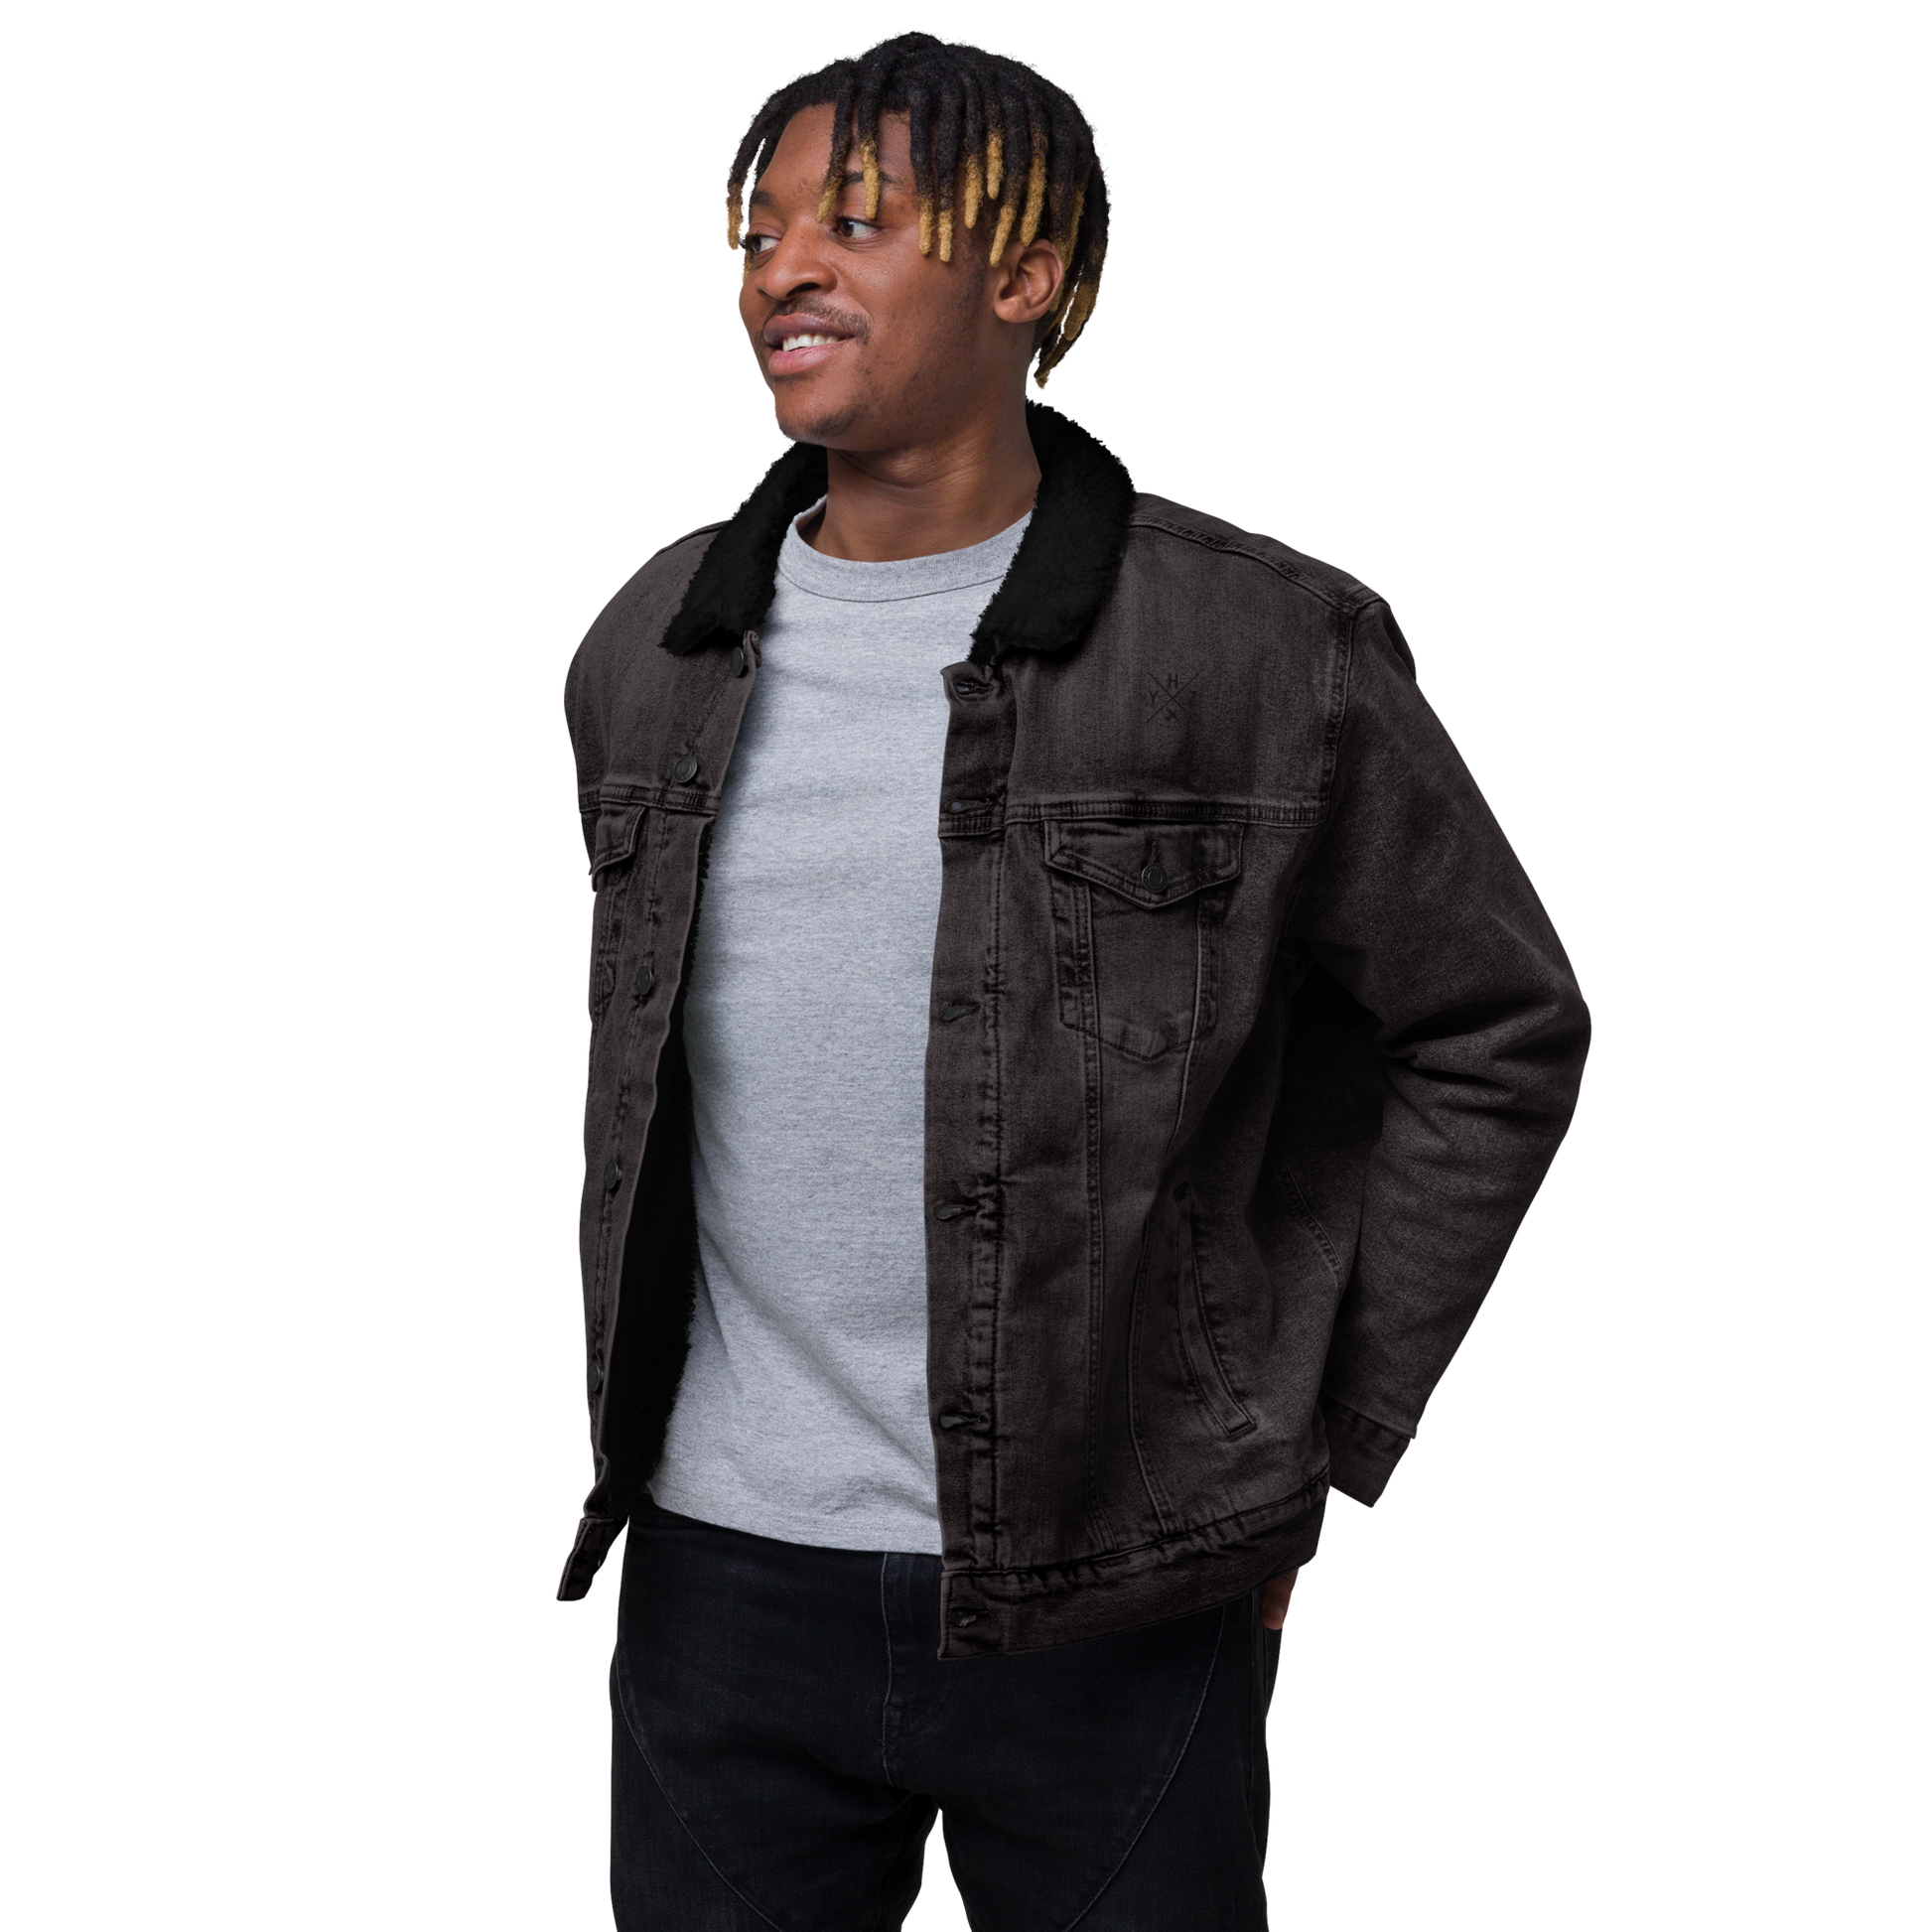 YHM Designs - YHZ Halifax Denim Sherpa Jacket - Crossed-X Design with Airport Code and Vintage Propliner - Black & White Embroidery - Image 08